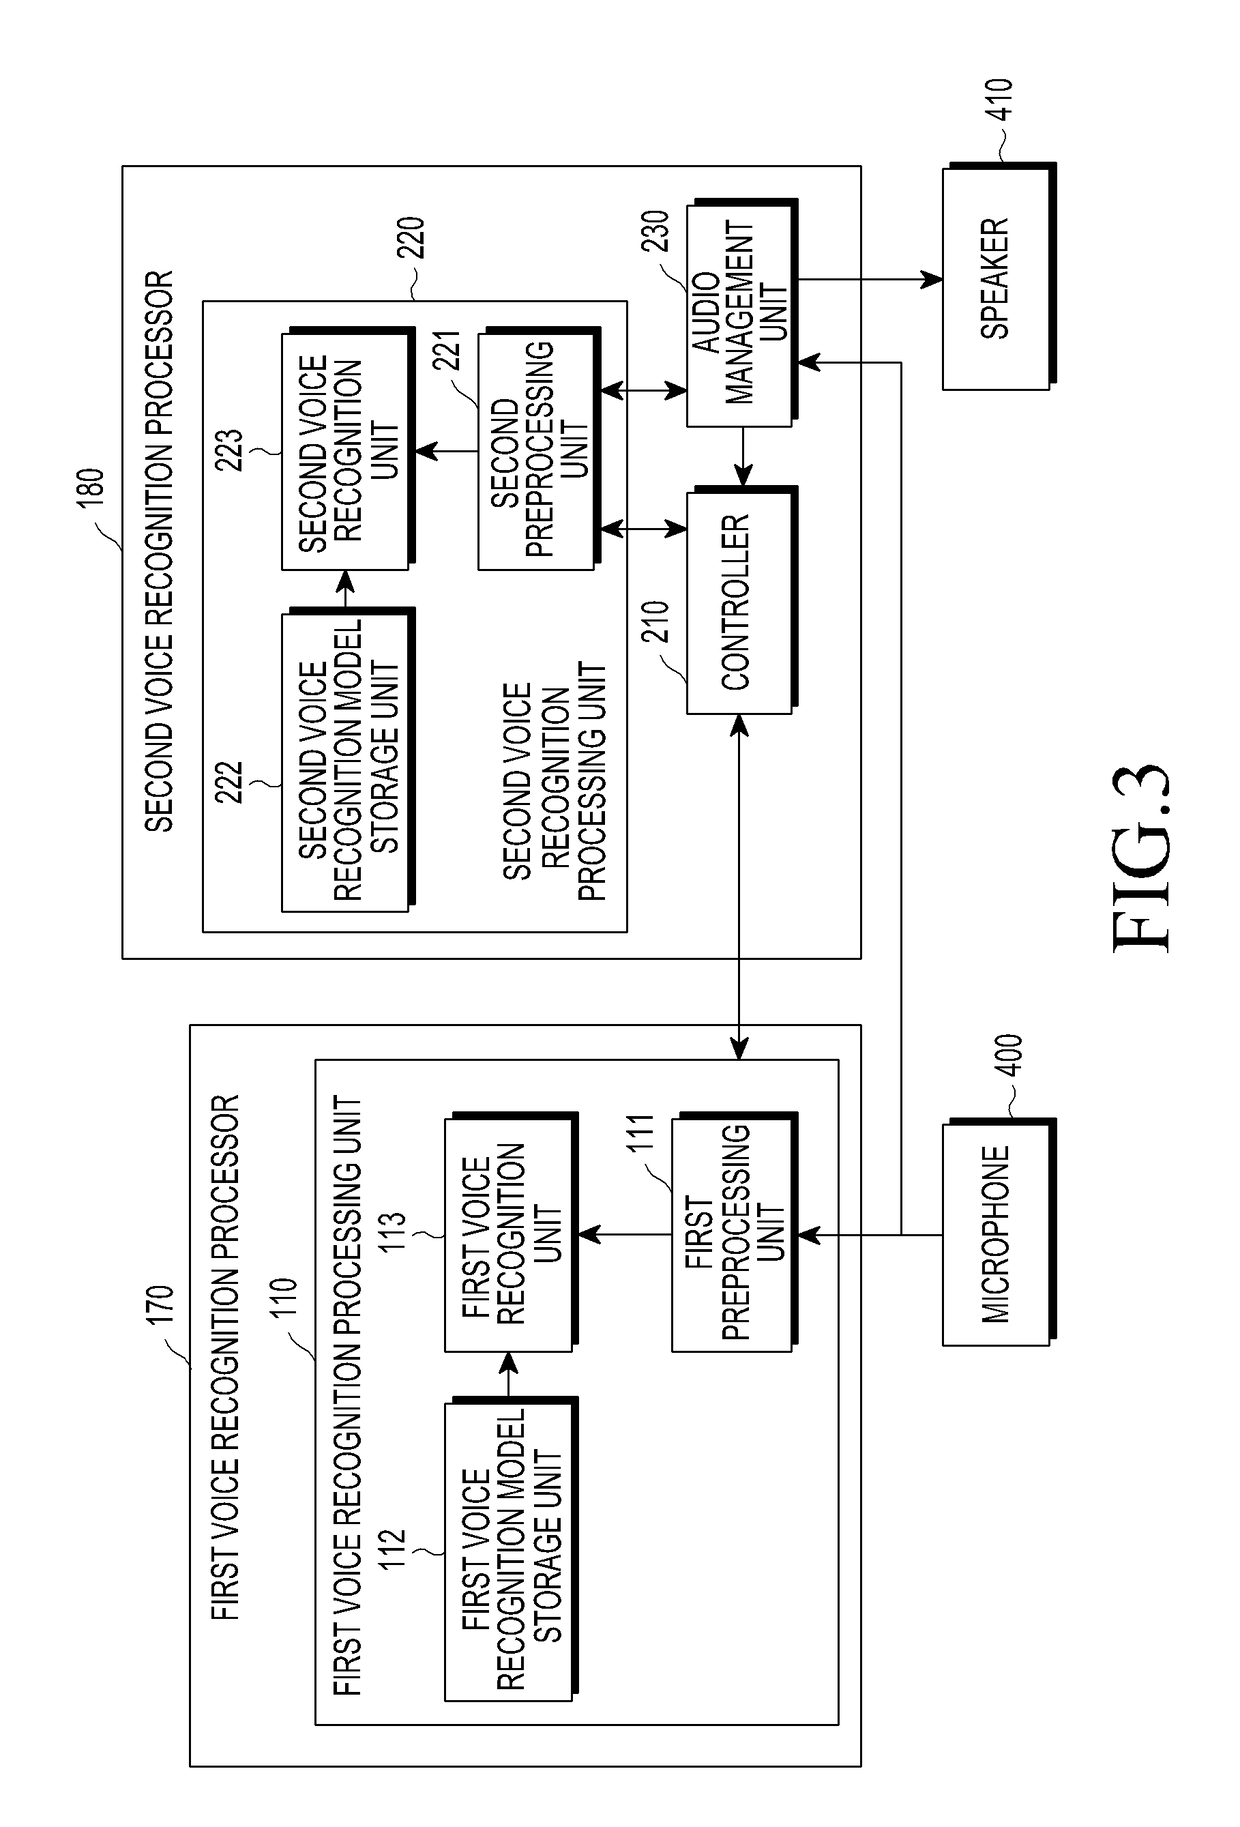 Electronic device and method for voice recognition using a plurality of voice recognition engines